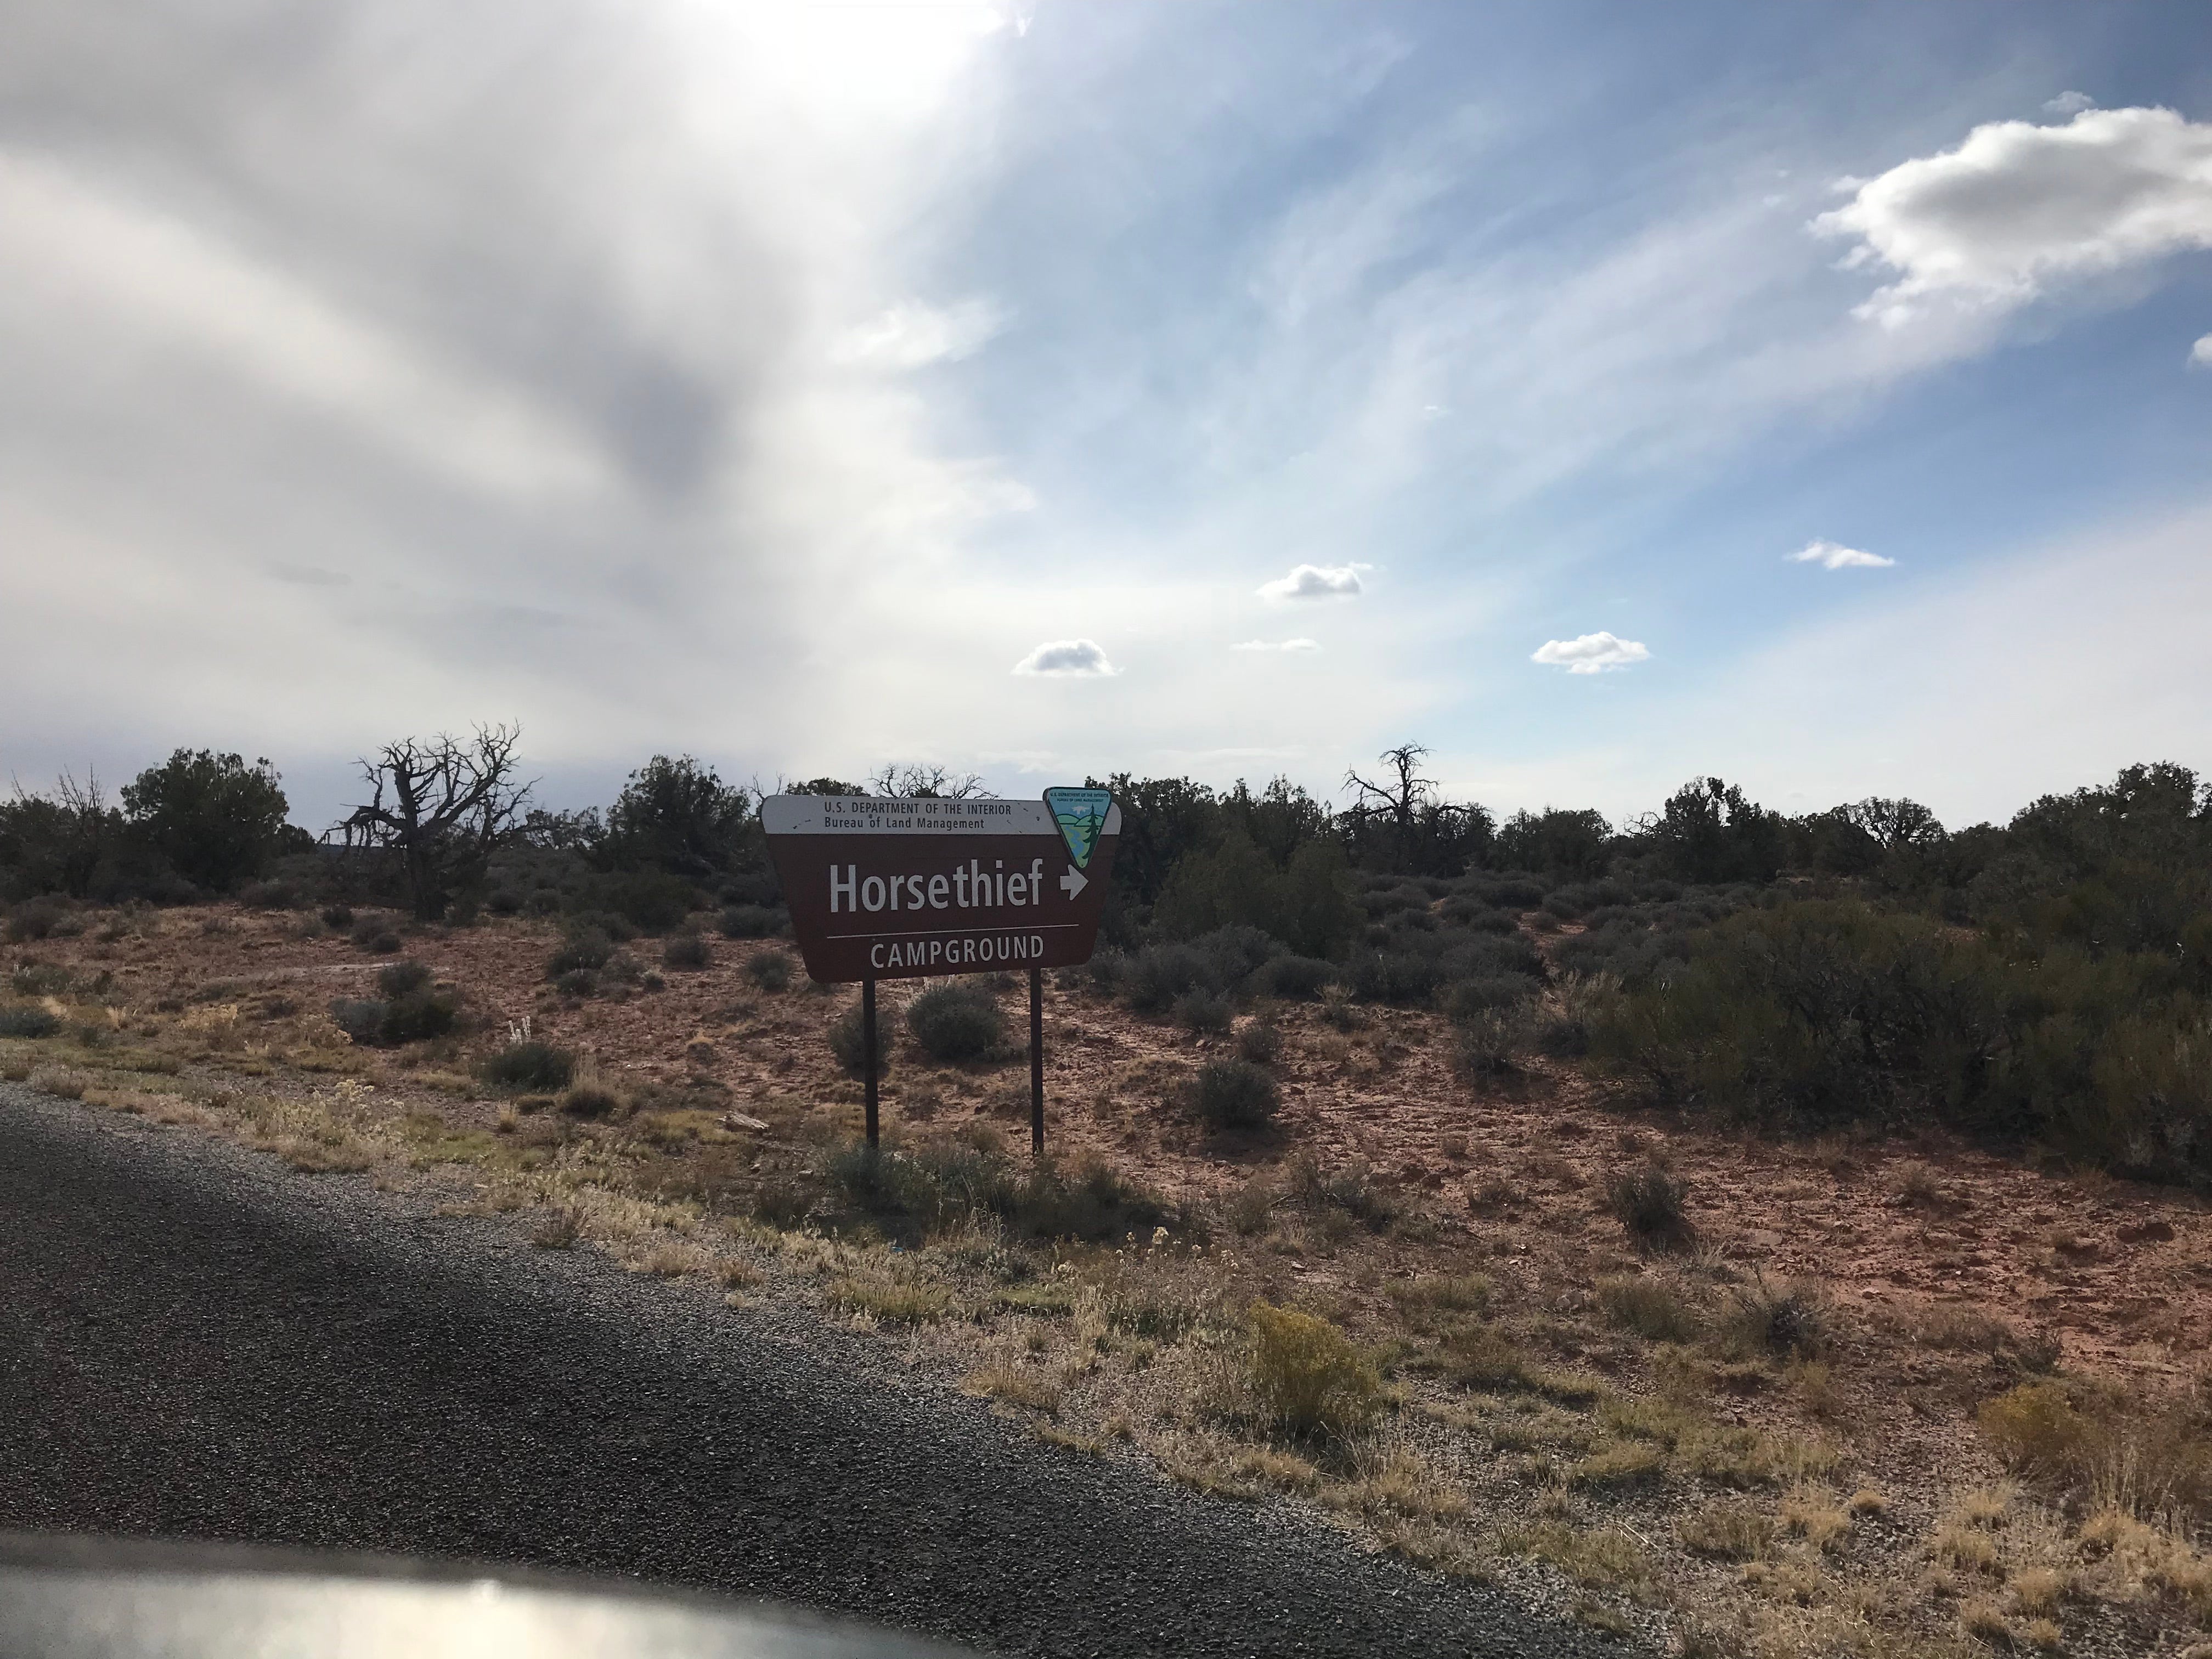 The entrance sign to the campground.  This is outside on the paved road then you turn off just after to a dirt road.  The campground will then be on your left about a quarter mile down.  They are building new sites on the right hand side which will expand the capacity of the area.